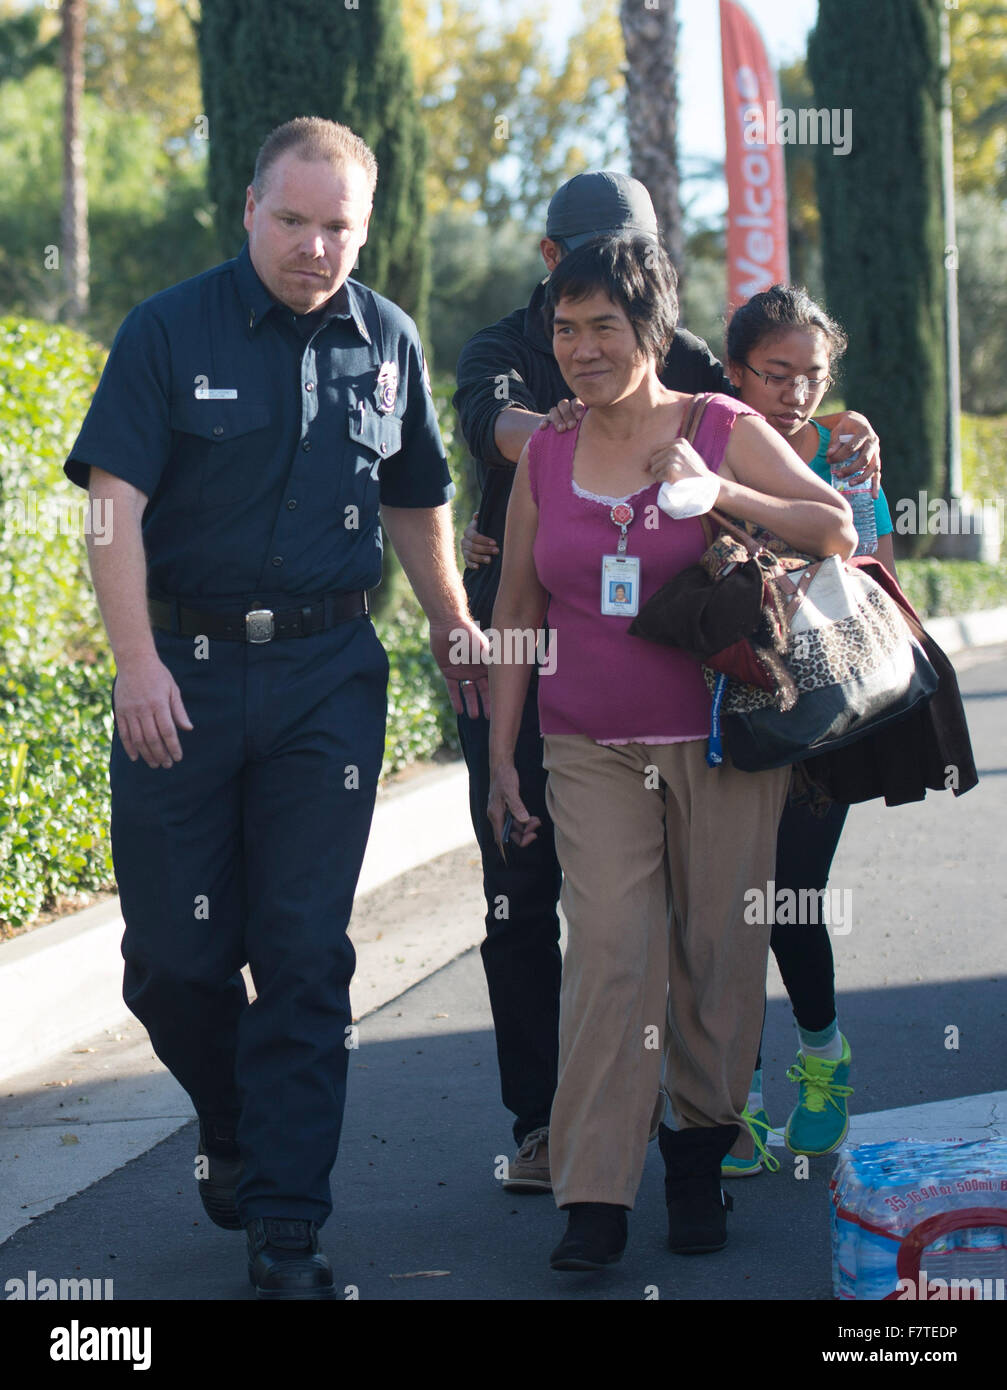 Los Angeles, USA. 2nd Dec, 2015. A survivor (R) of the mass shooting at the Inland Regional Center meets her family after police questioning in San Bernardino City of Southern California, the United States, Dec. 2, 2015. One suspect was gunned down and one in custody Wednesday afternoon after a shooting killed at least 14 people and injured 14 others in San Bernardino, local media reported. Credit:  Yang Lei/Xinhua/Alamy Live News Stock Photo